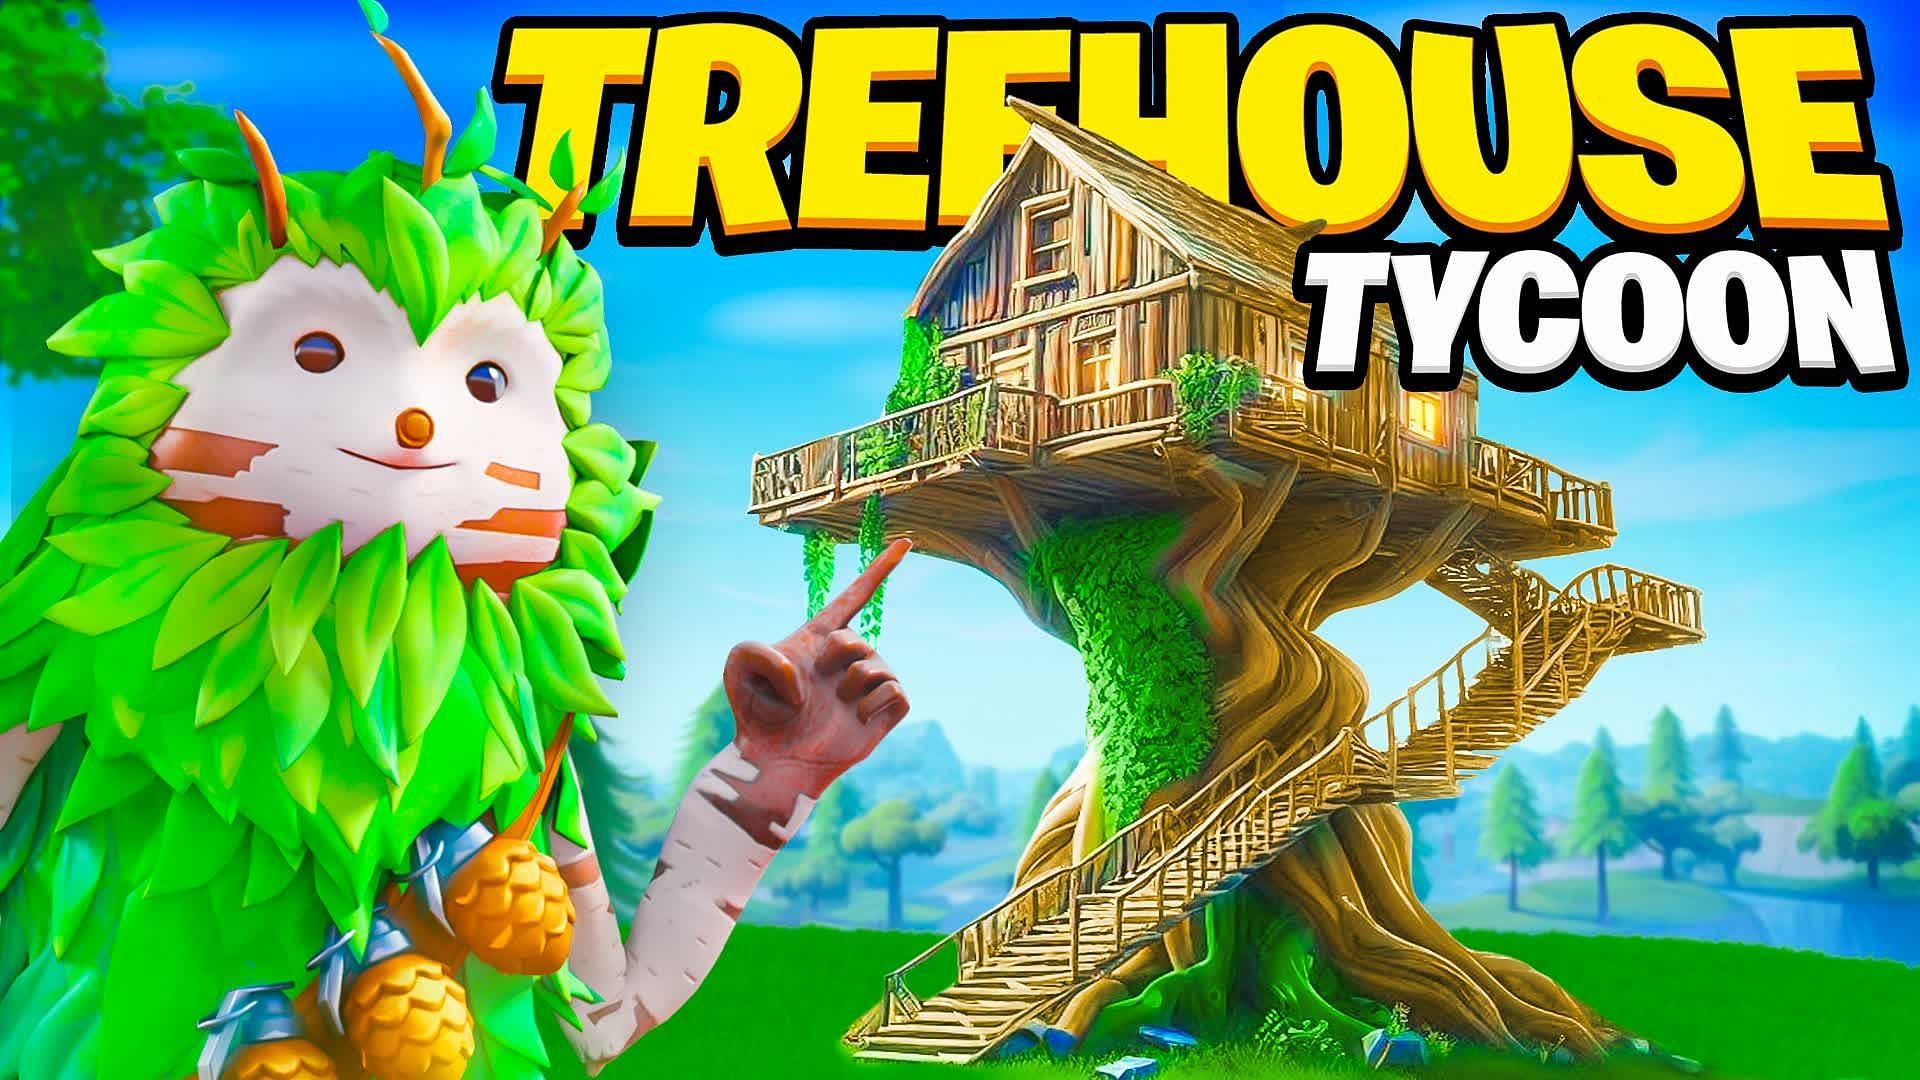 Fortnite Treehouse Tycoon: UEFN map code, how to play, and more